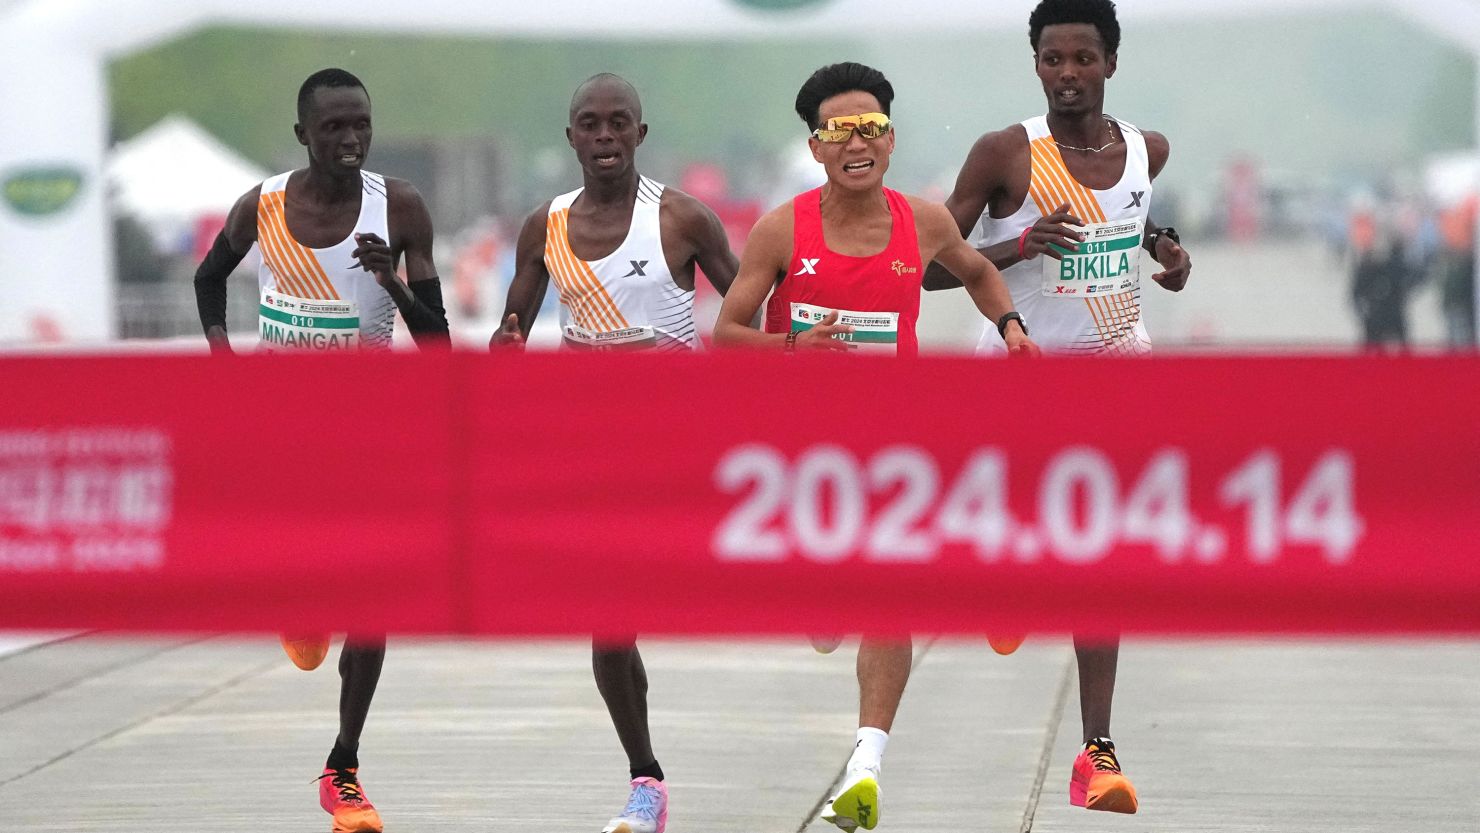 Beijing half-marathon winners stripped of medals after African trio allowed Chinese runner to win